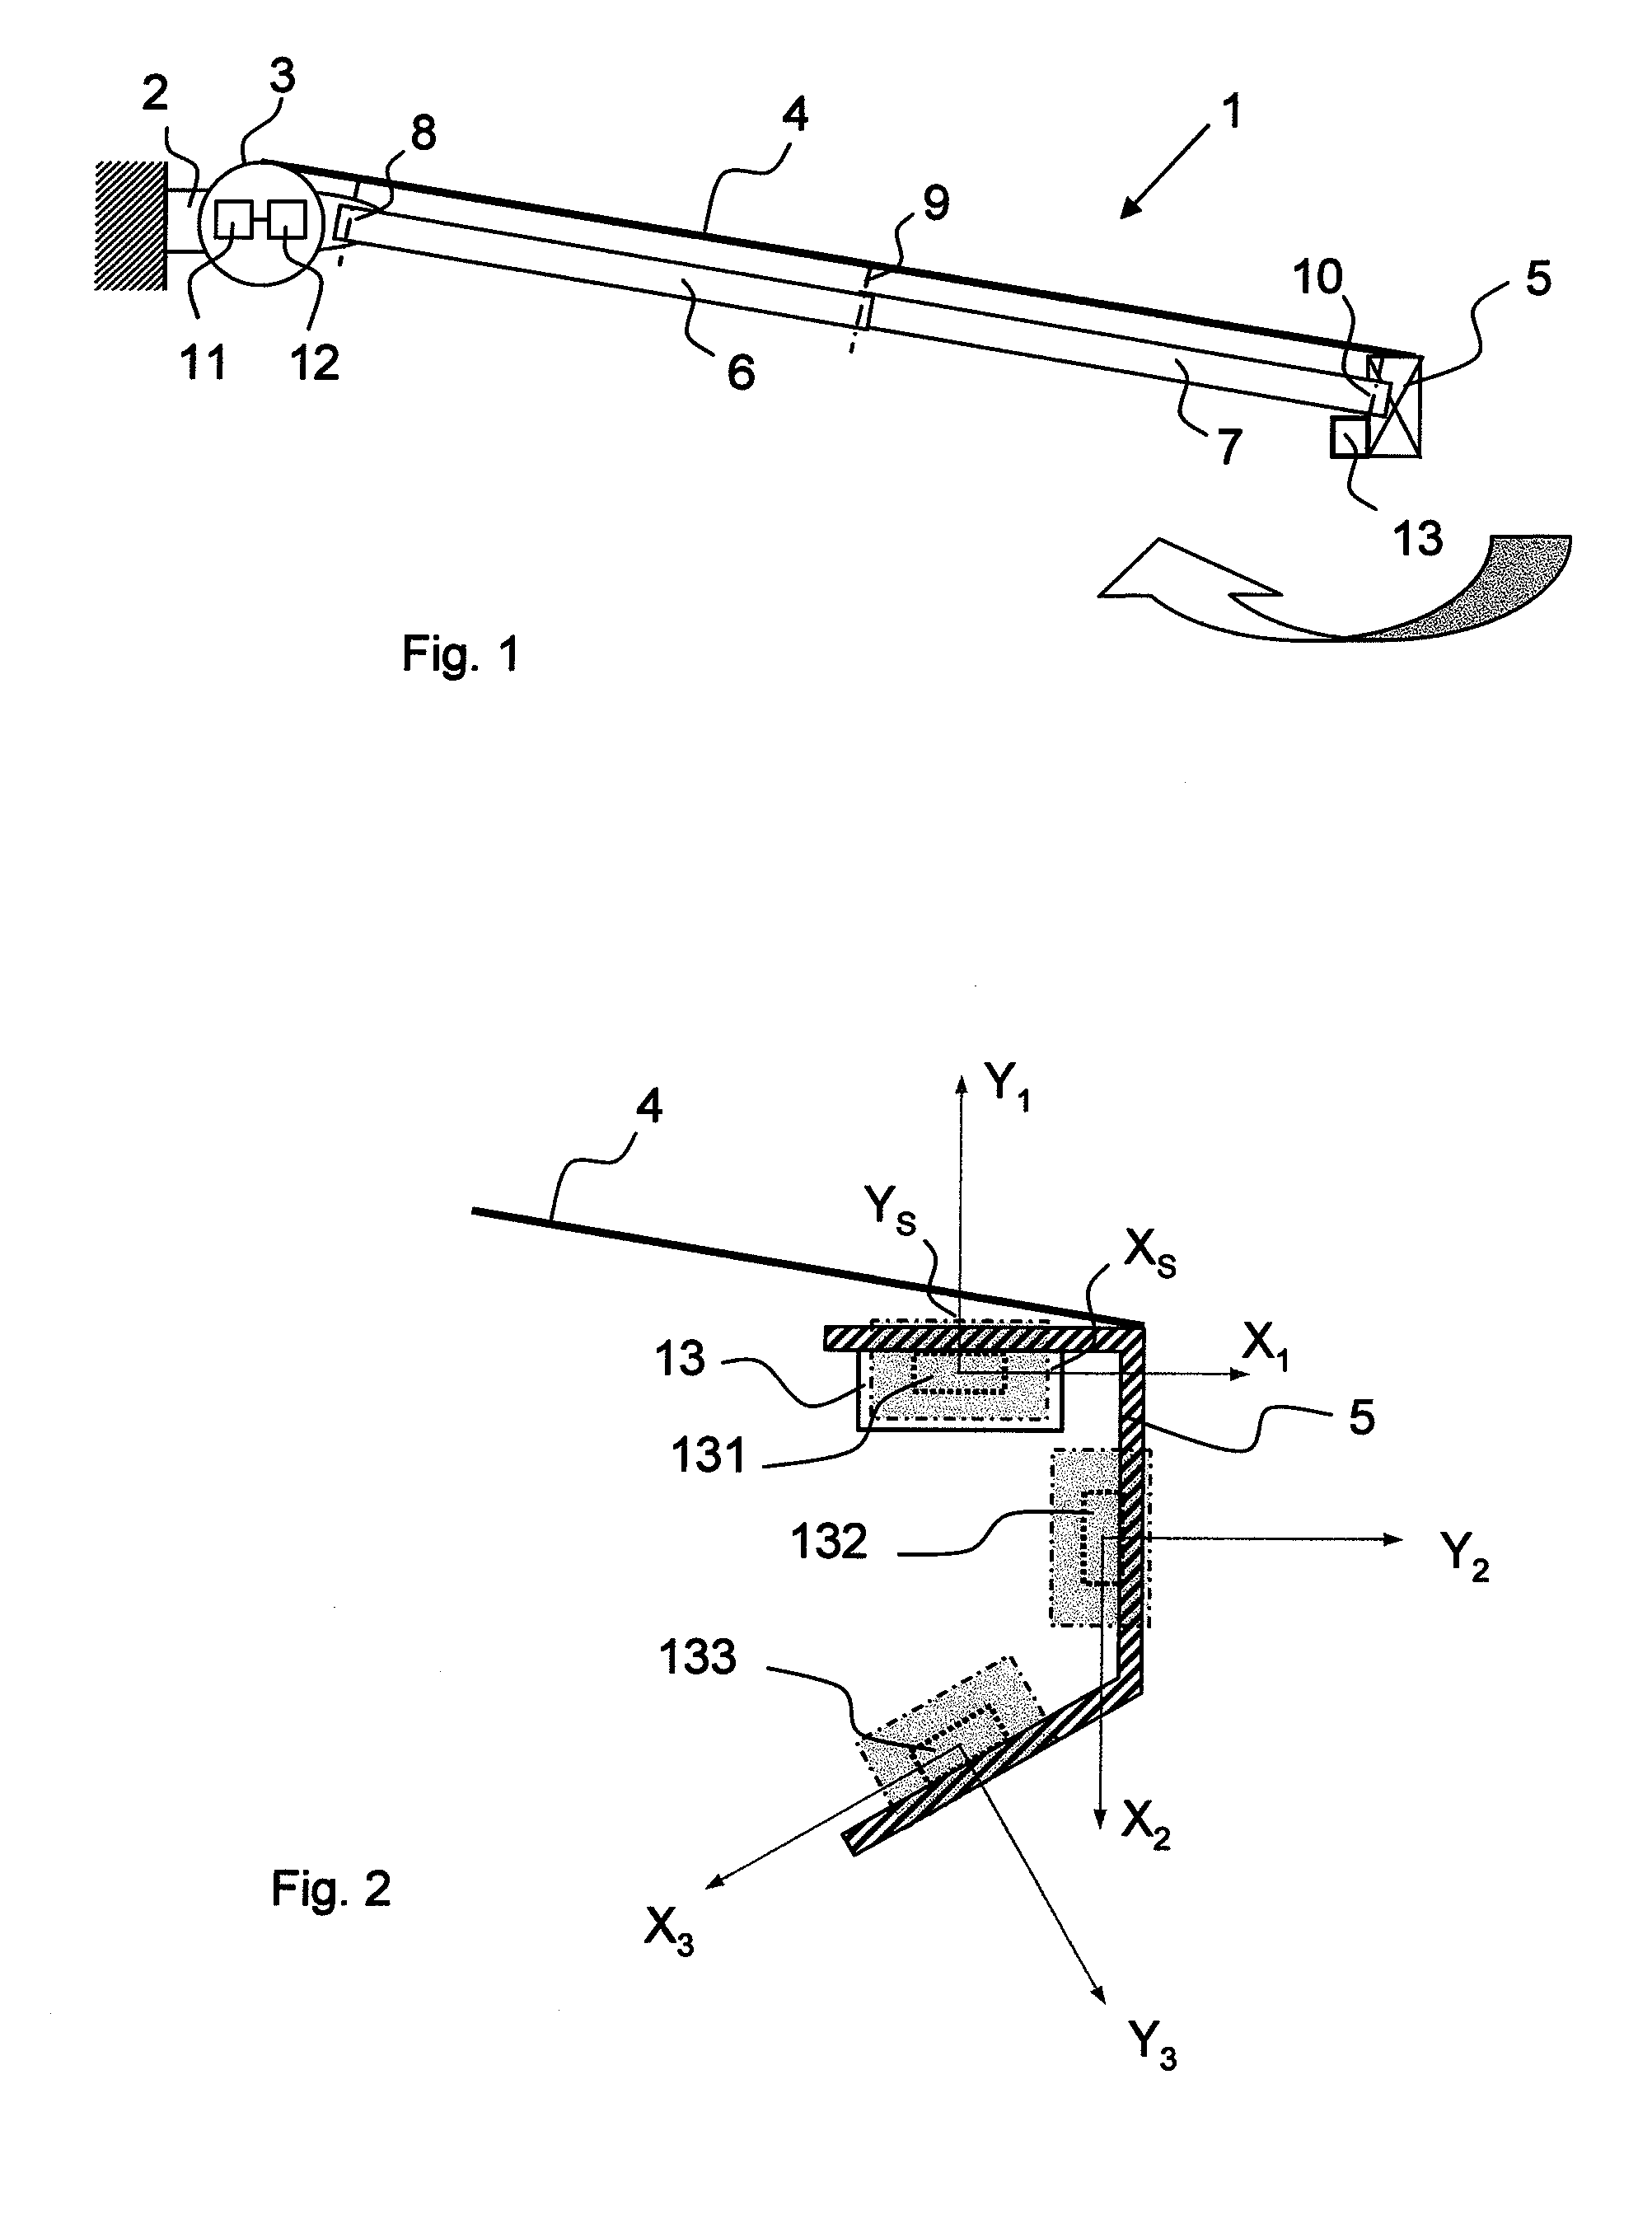 Method for Determining the Effects of the Wind on a Blind